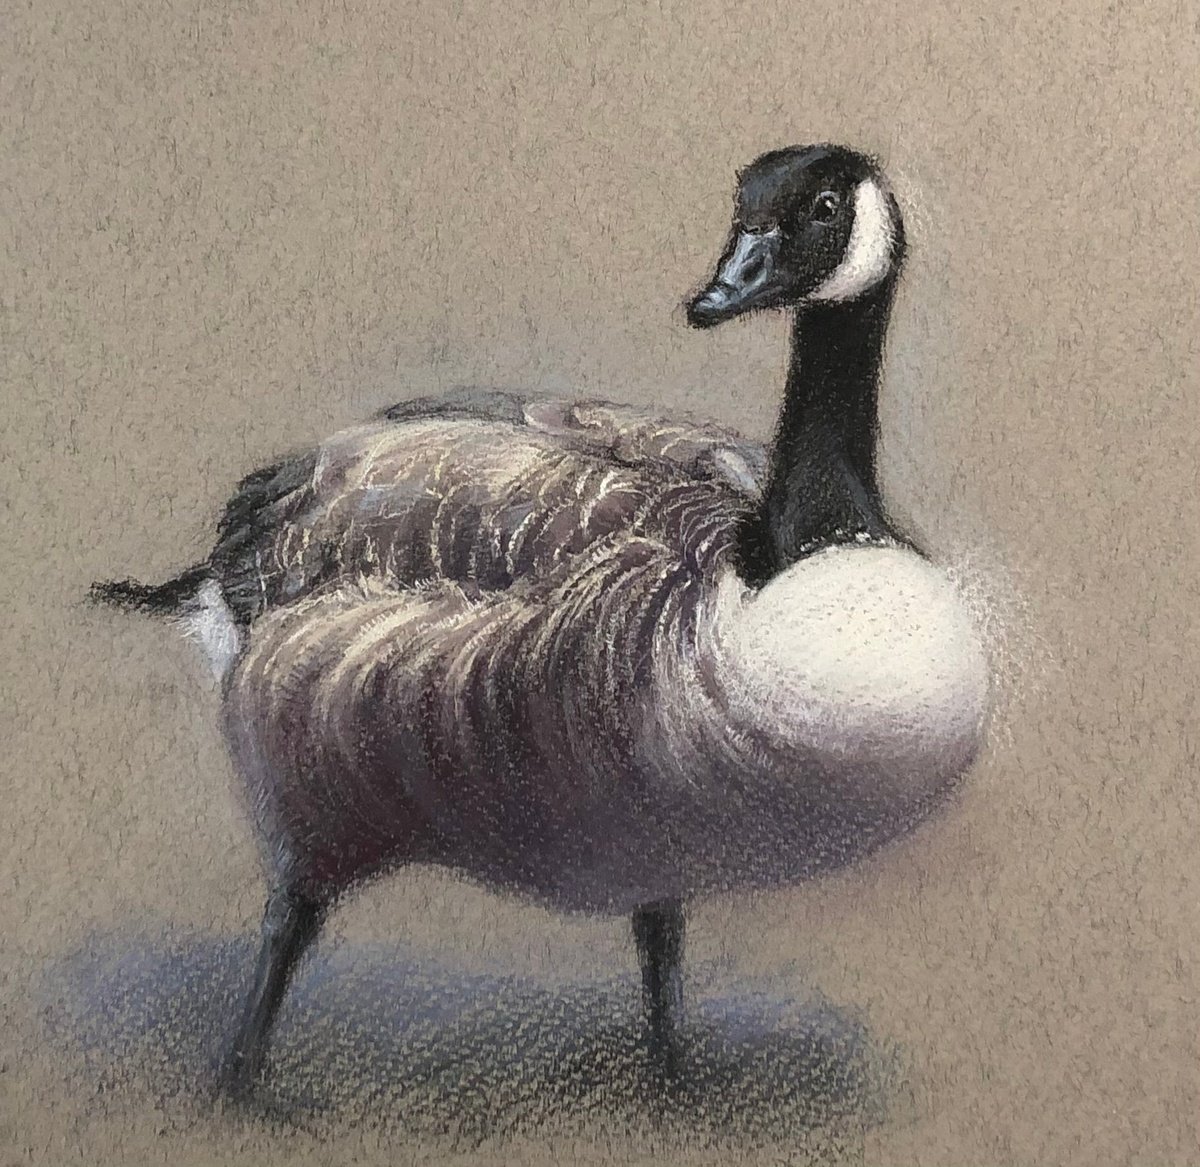 Canada goose by Natalie Ayas